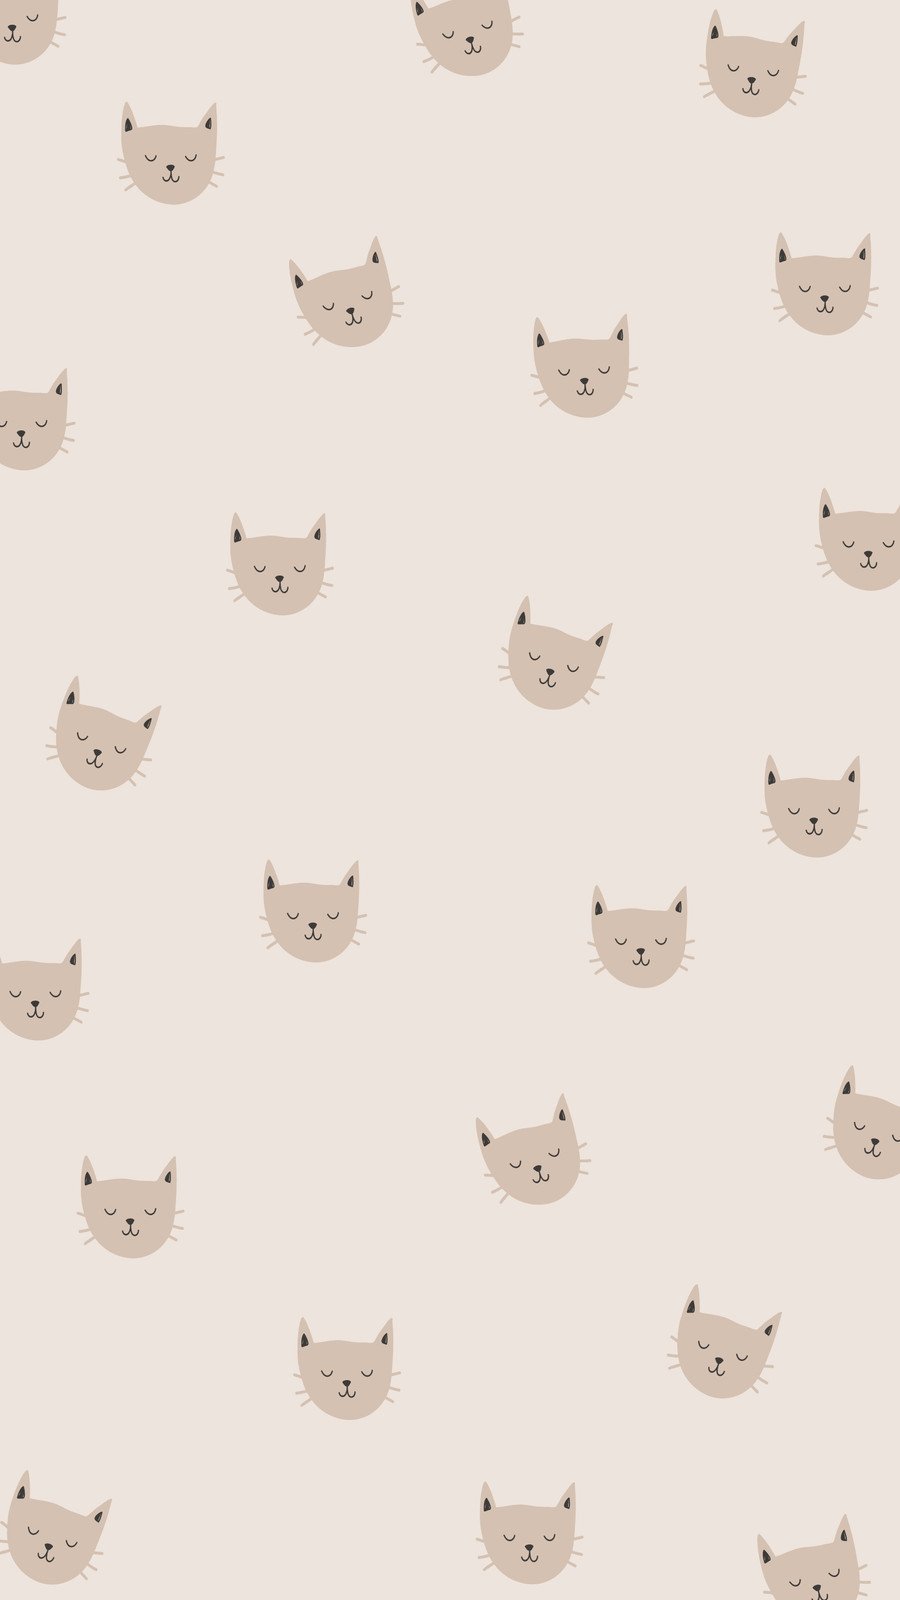 Page 2 - Free customizable cat phone wallpaper templates | Canva